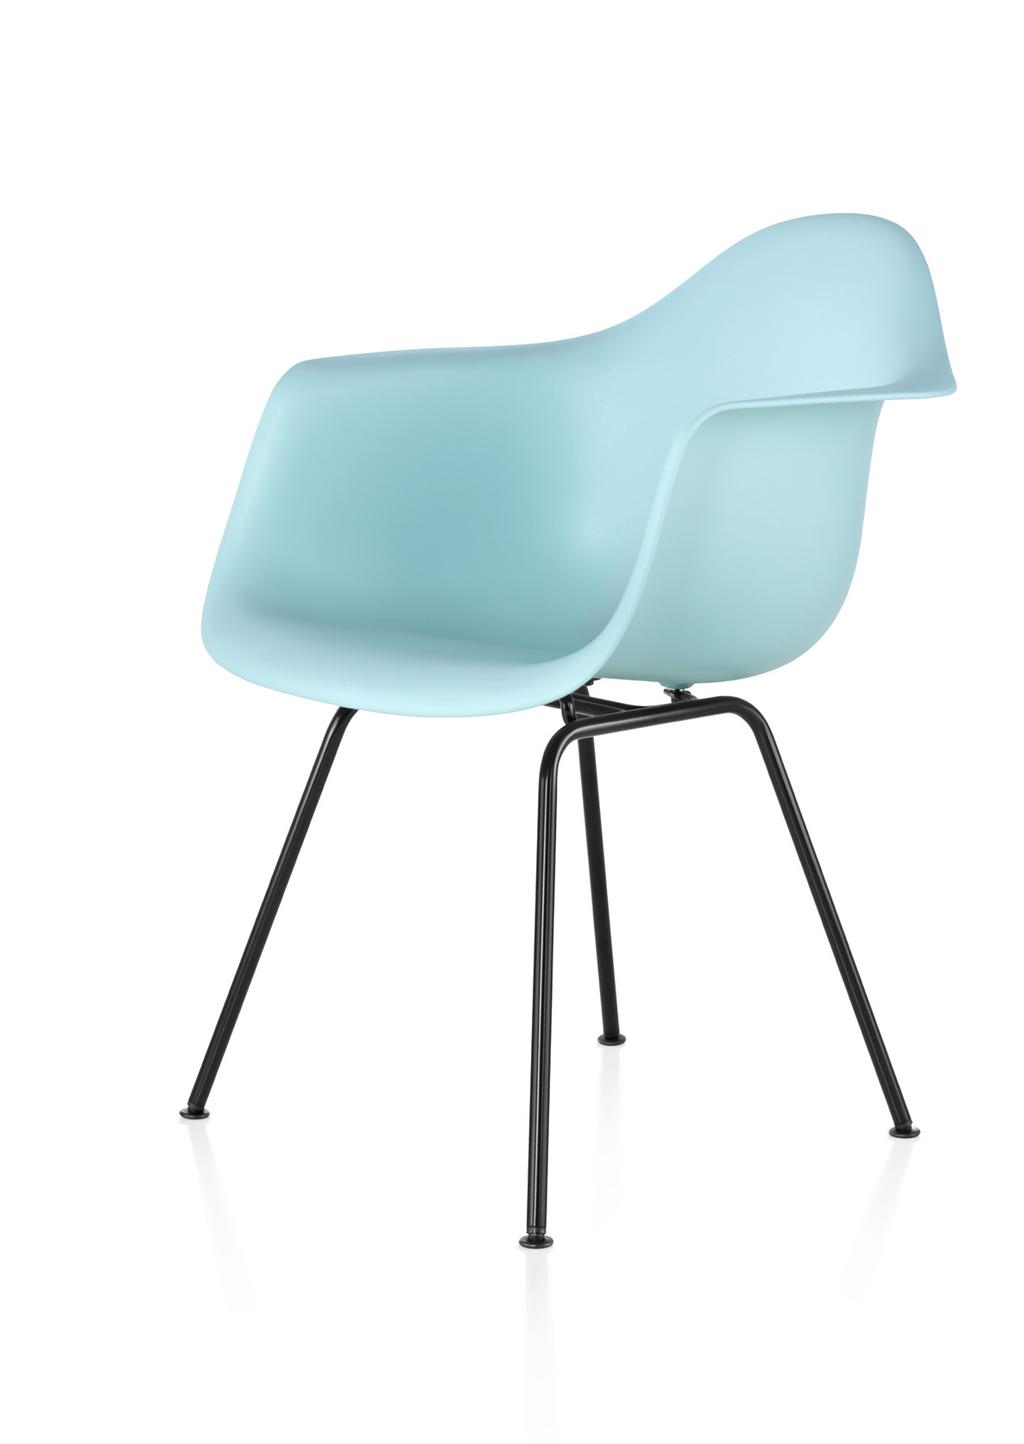 Eames Molded Plastic Armchair 4-Leg Base 14% recycled content; 100% recyclable The sleek lines and organic shape of this enduring chair by Charles and Ray Eames epitomize their